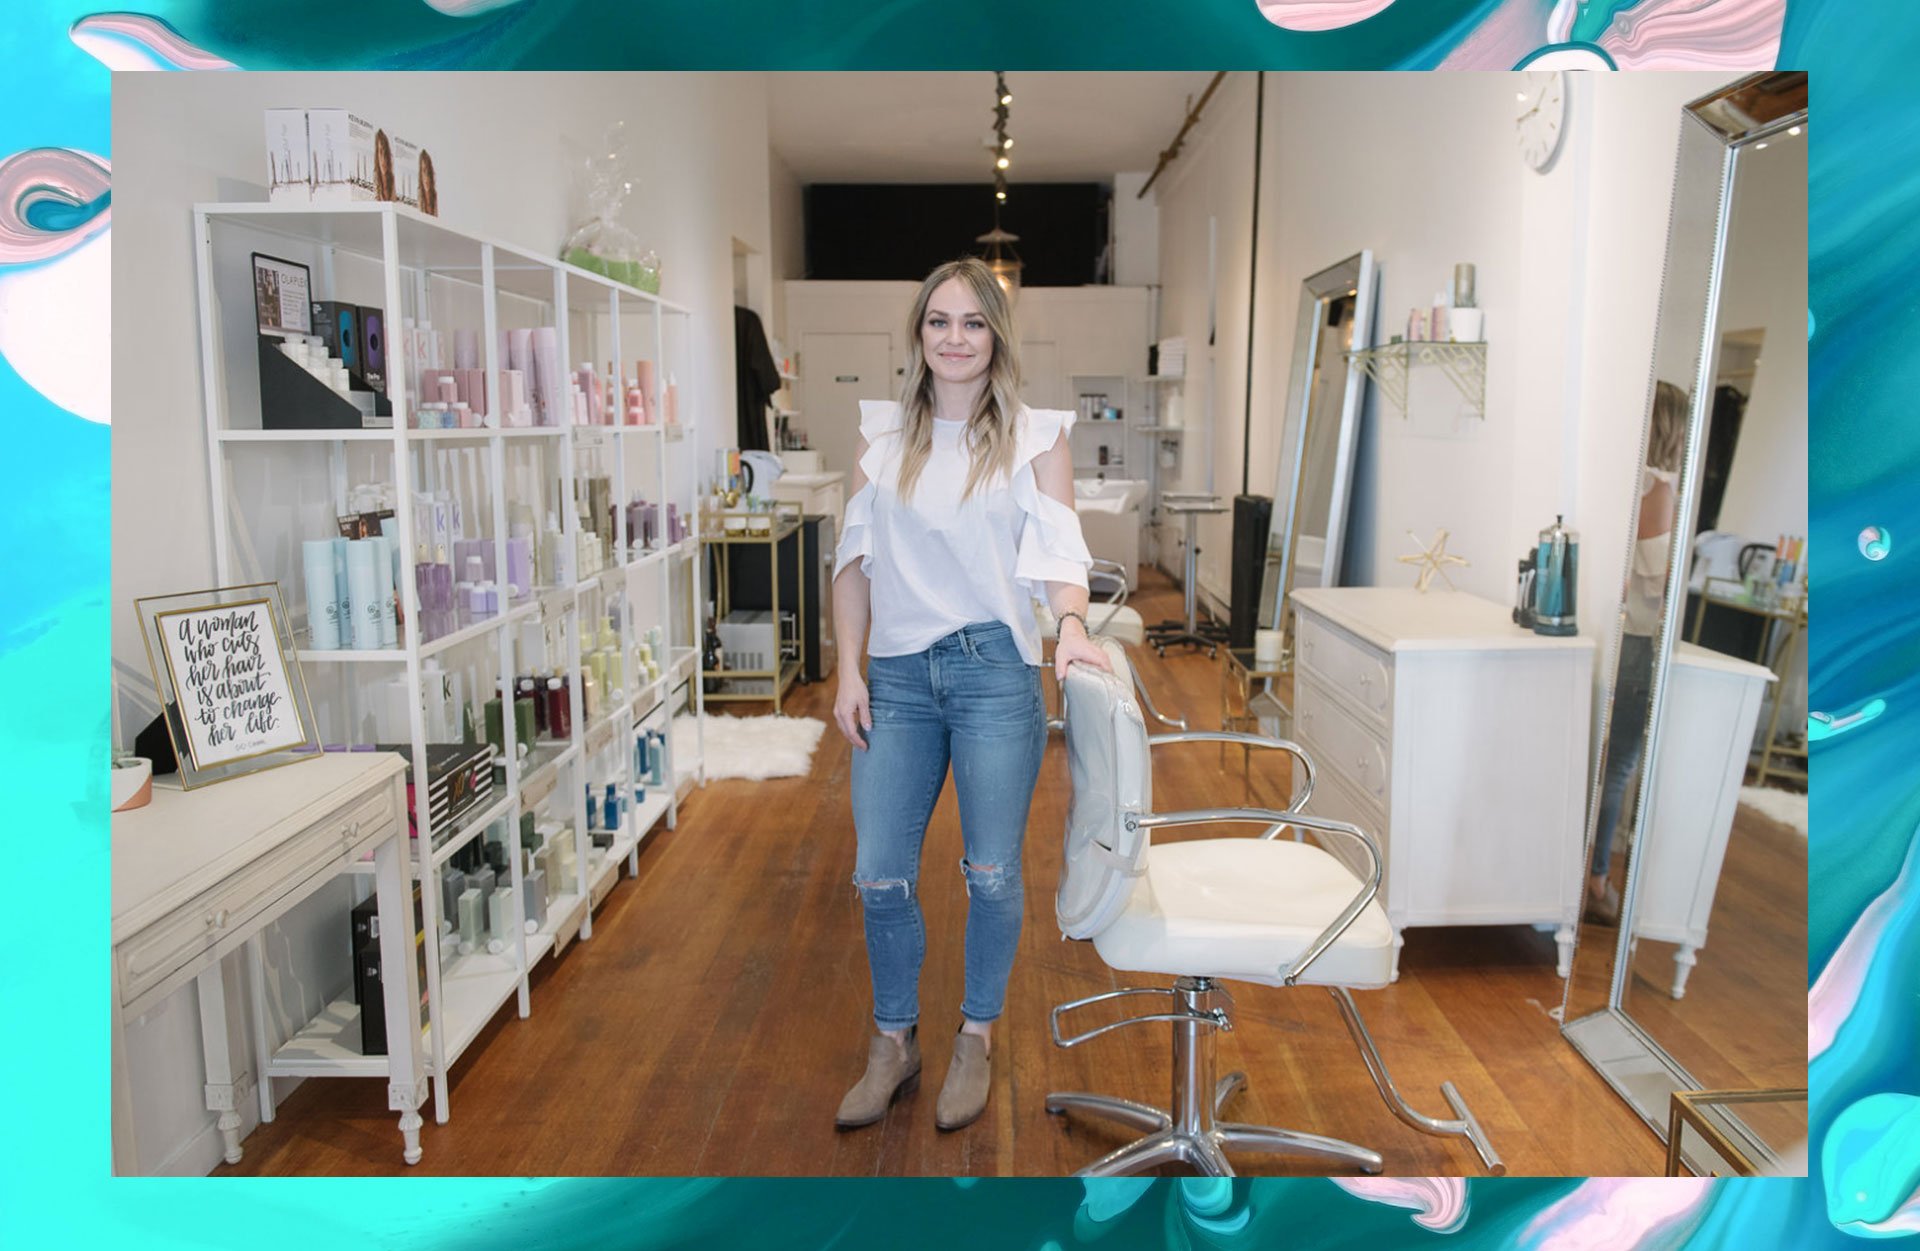 Shear Talent: Tyla Malcolm Becomes Newest Entrepreneur in Prince Rupert with Parlour Beauty Boutique